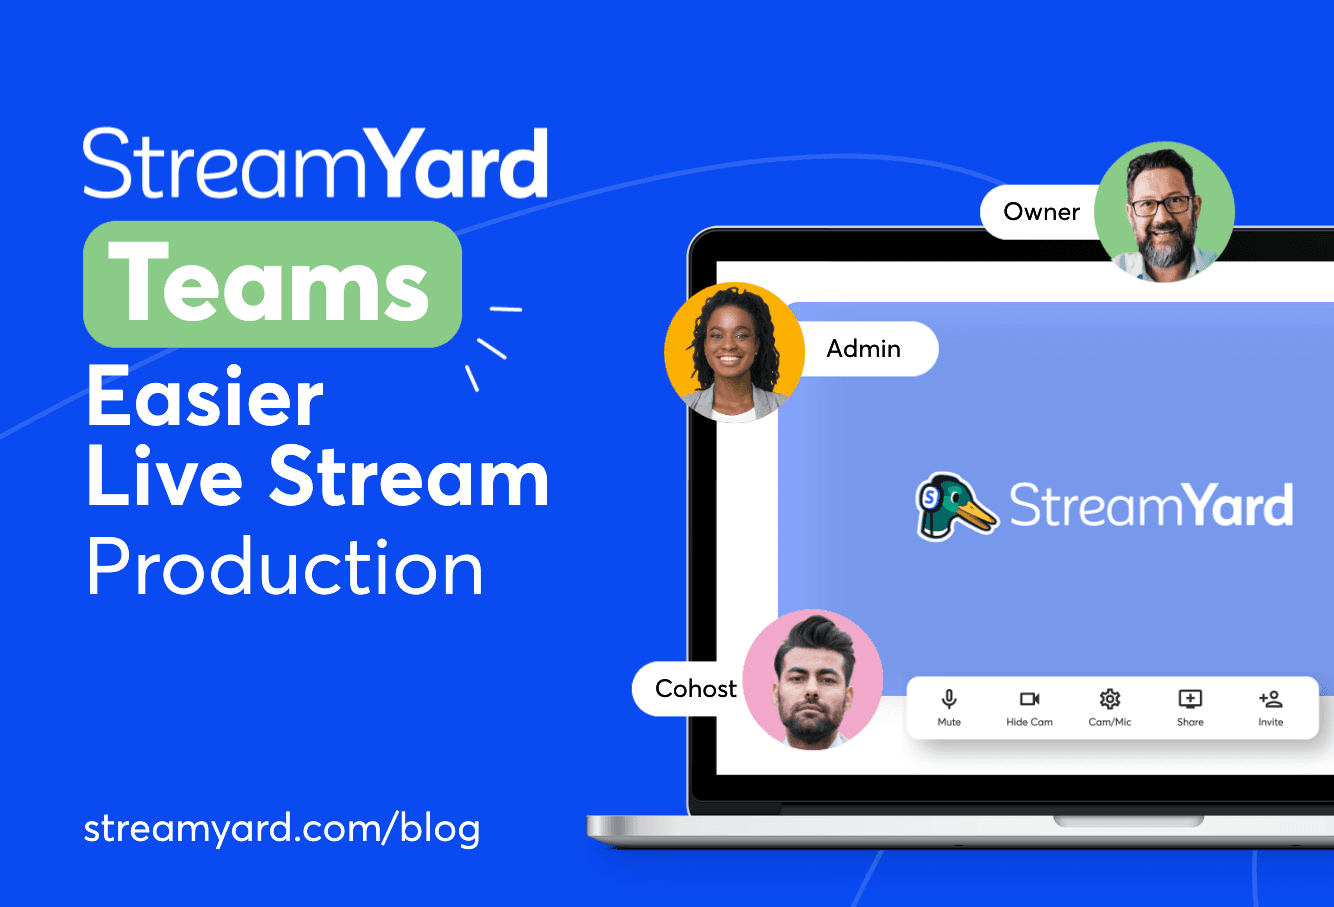 Here’s how to use StreamYard Teams to improve live stream production and make it easier to collaborate during your live stream broadcasts.